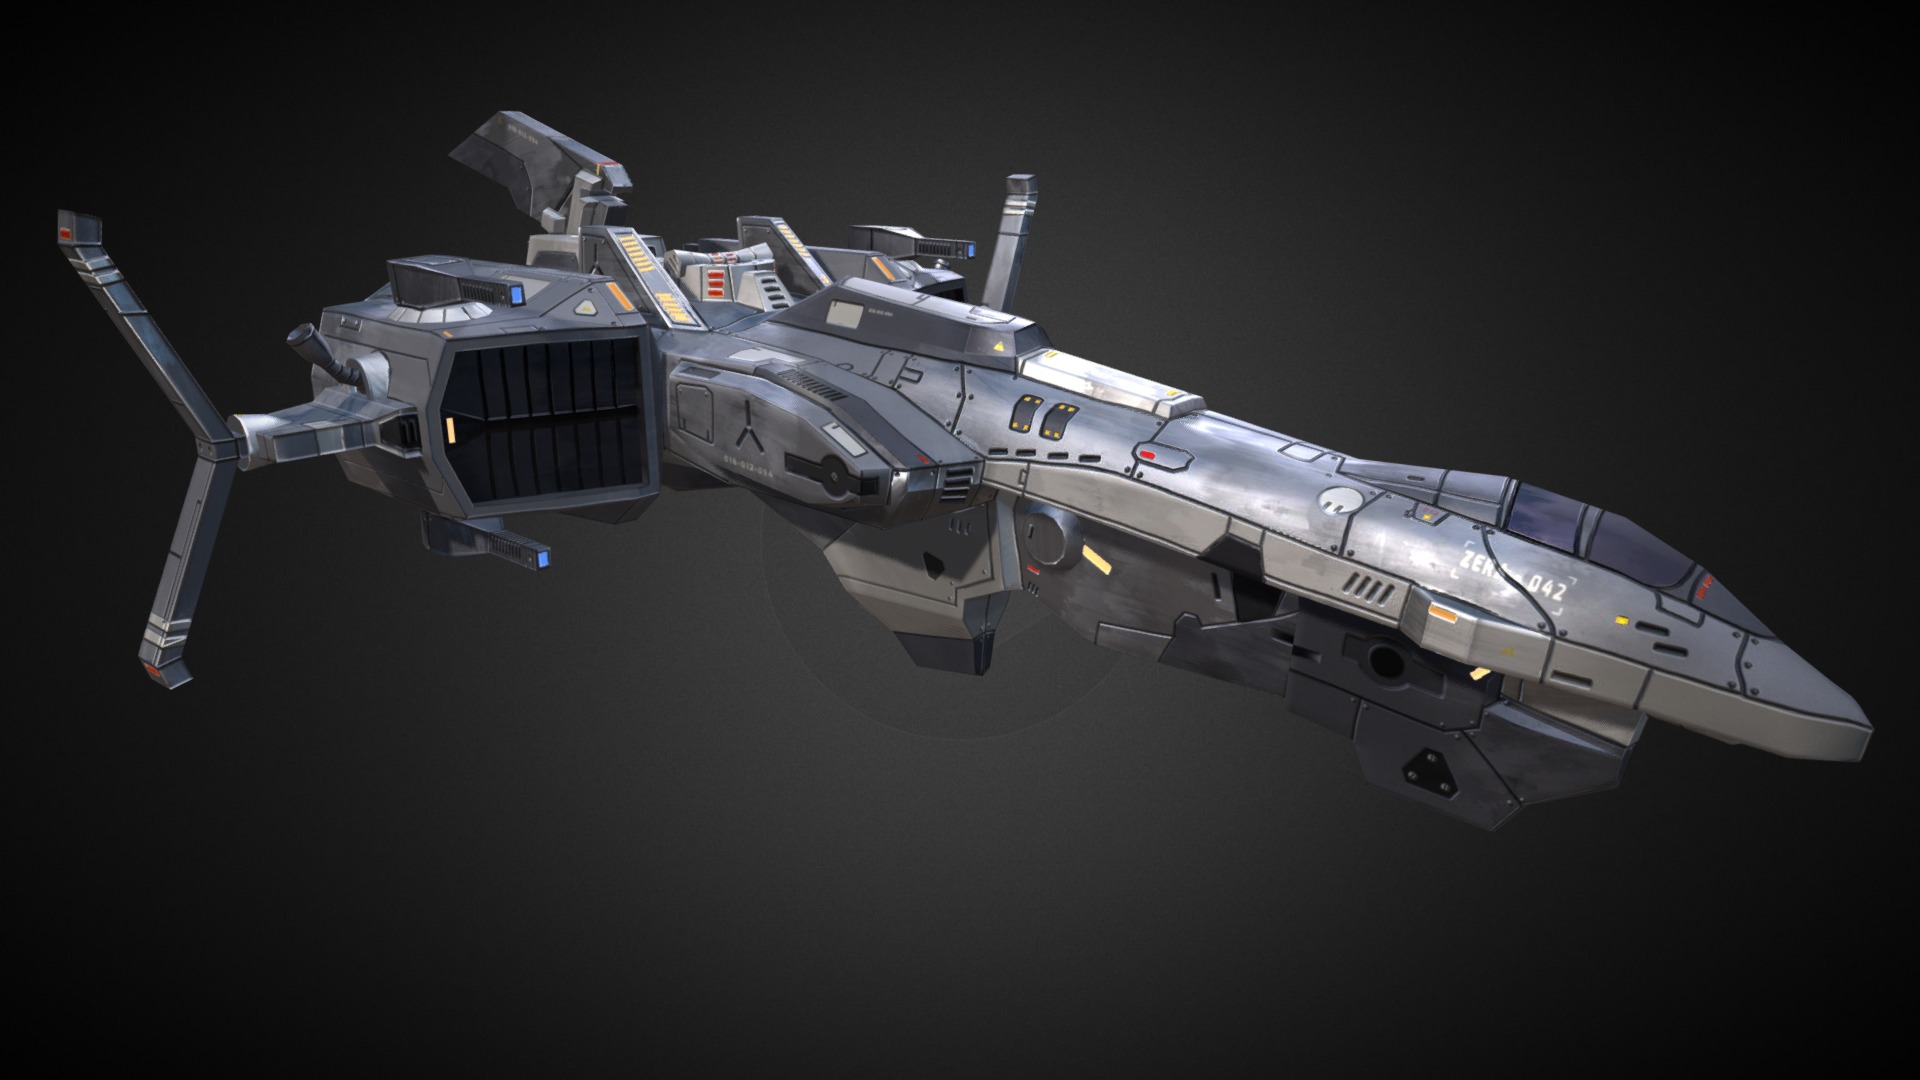 3D model Star Conflict – Spaceship - This is a 3D model of the Star Conflict - Spaceship. The 3D model is about a space shuttle in the sky.